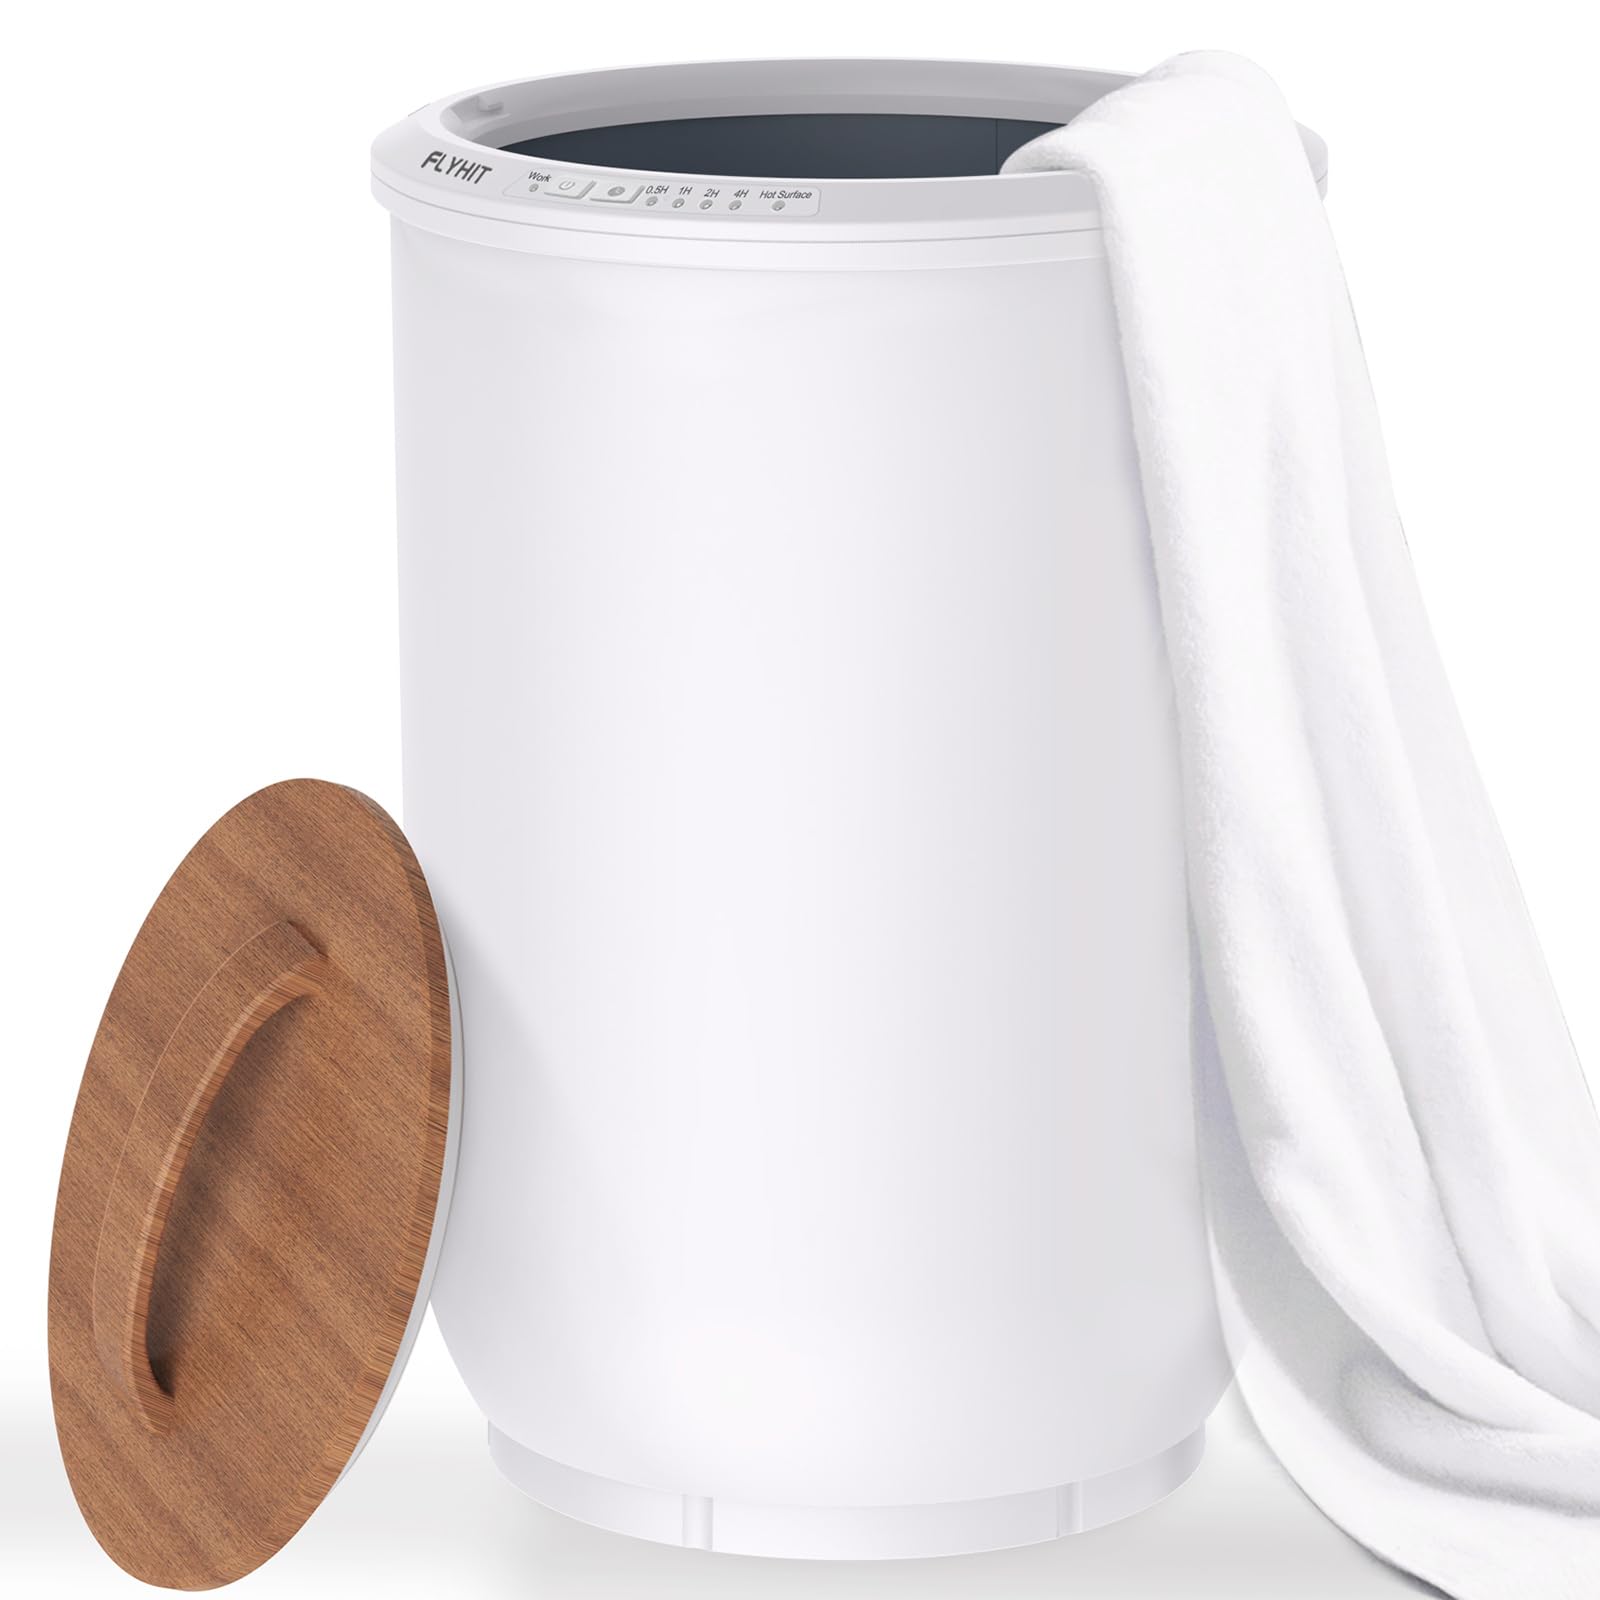 FLYHIT Luxury Towel Warmers for Bathroom - Wooden Lid, Large Towel Warmer Bucket, Auto Shut Off, Fits Up to Two 40